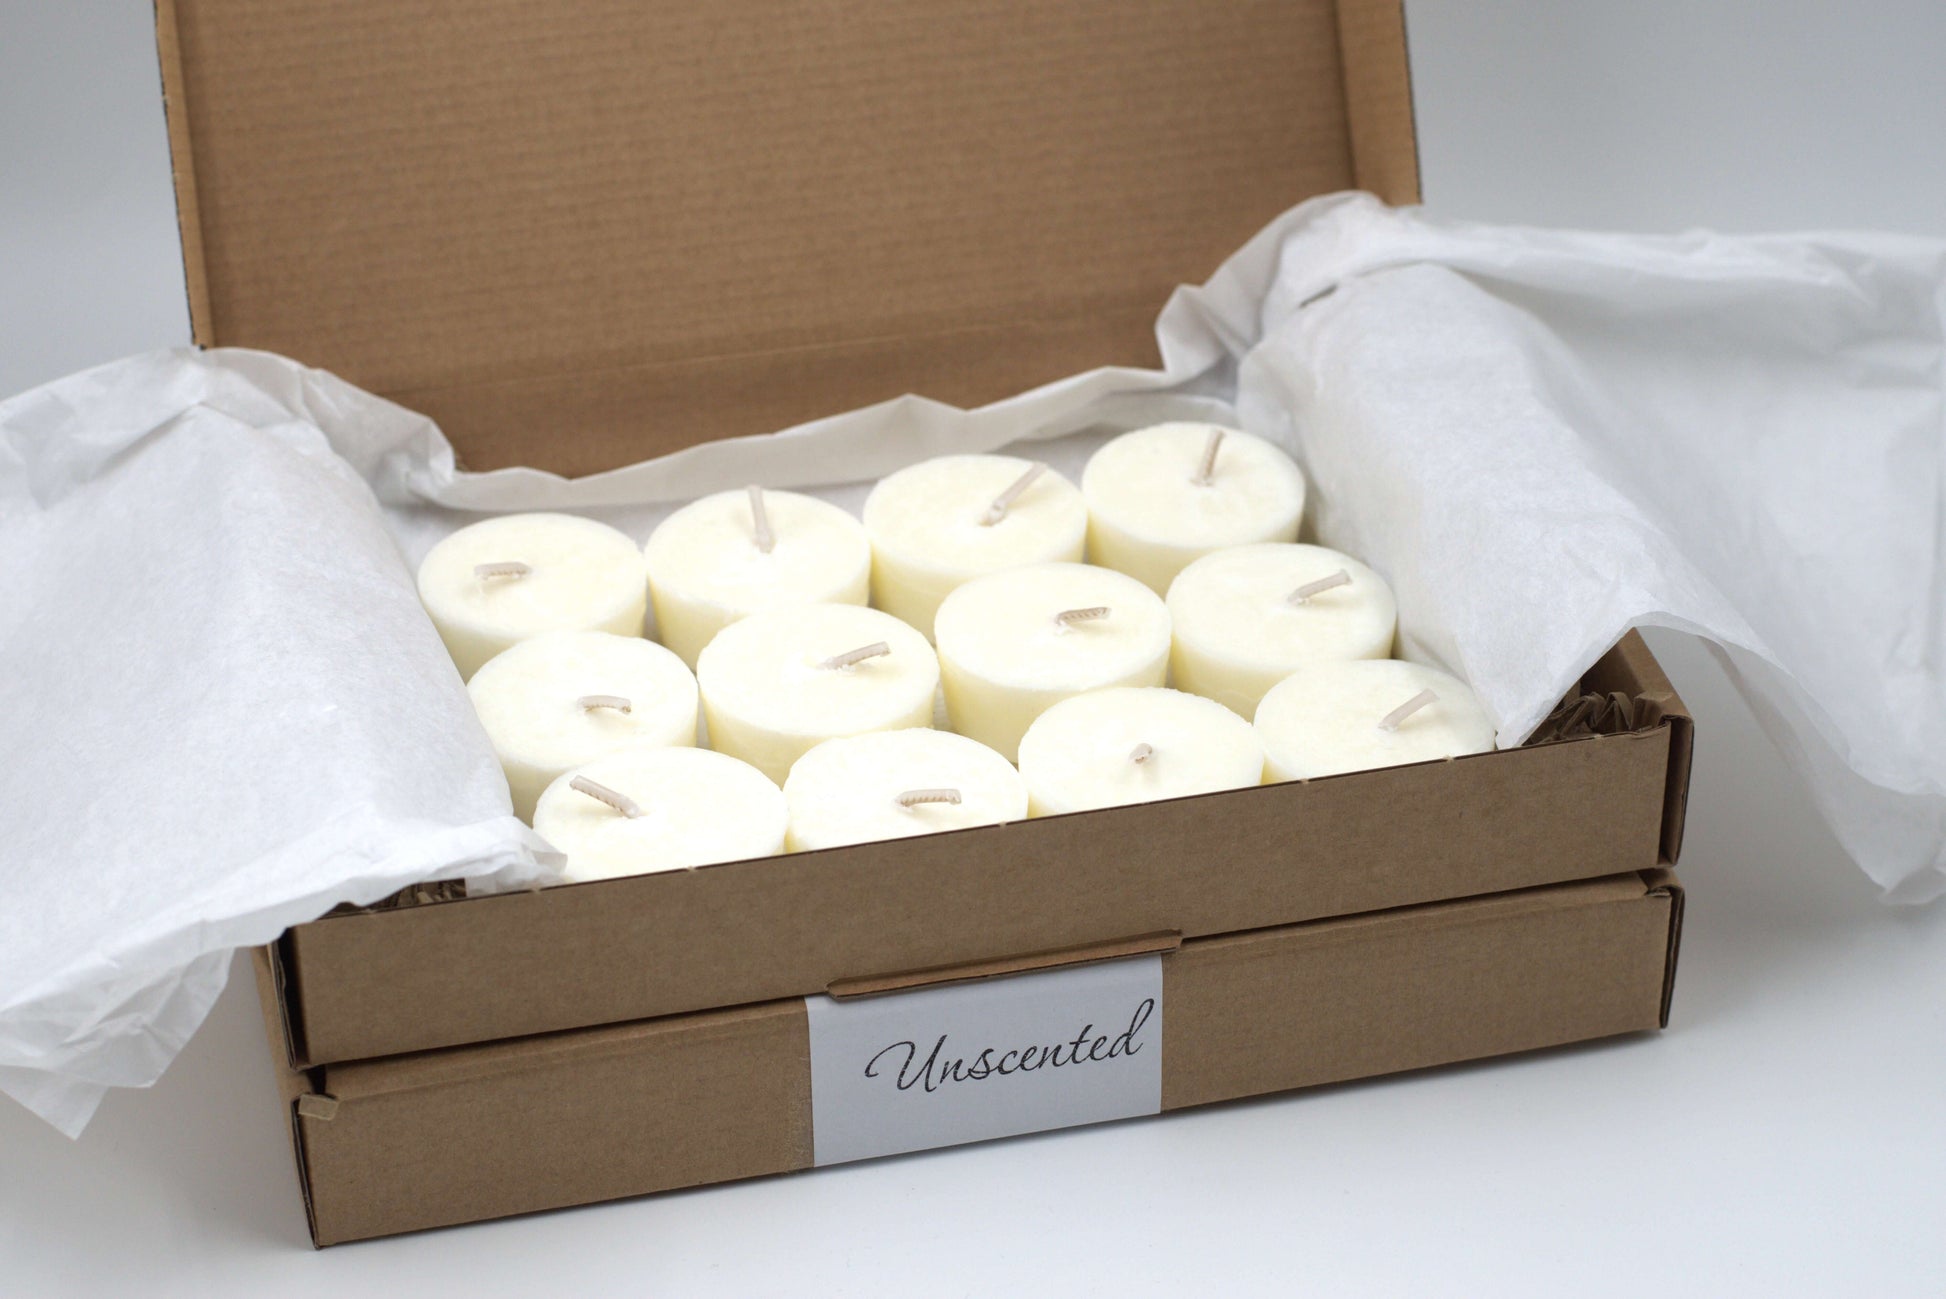 Twelve-pack of unscented tea light candles neatly packed in a cardboard box, perfect for use in refillable glass holders by Wonder Wick.